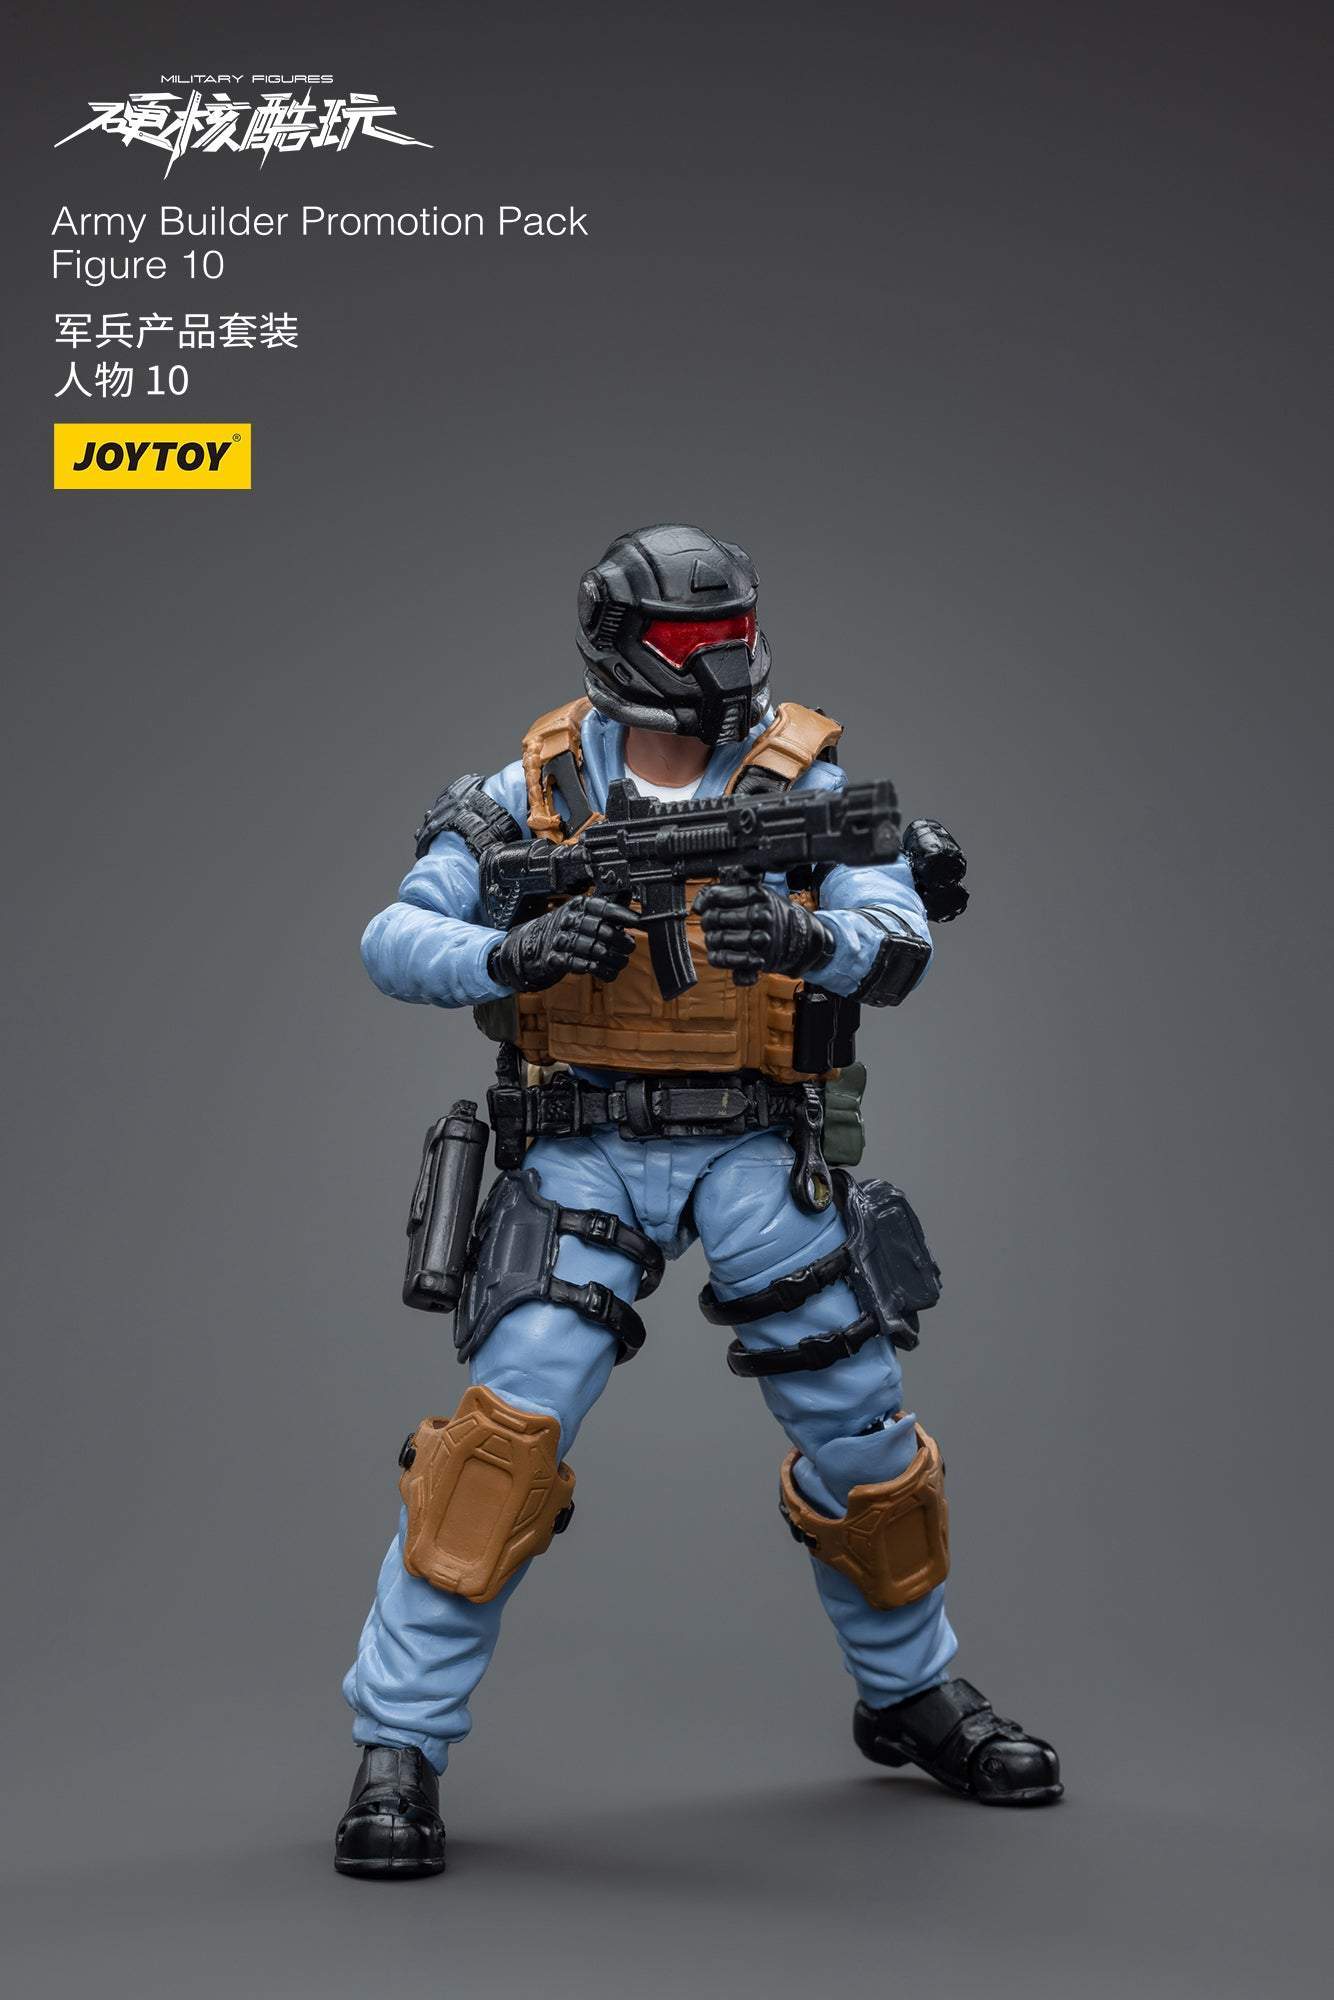 Army Builder Promotion Pack Figure 10